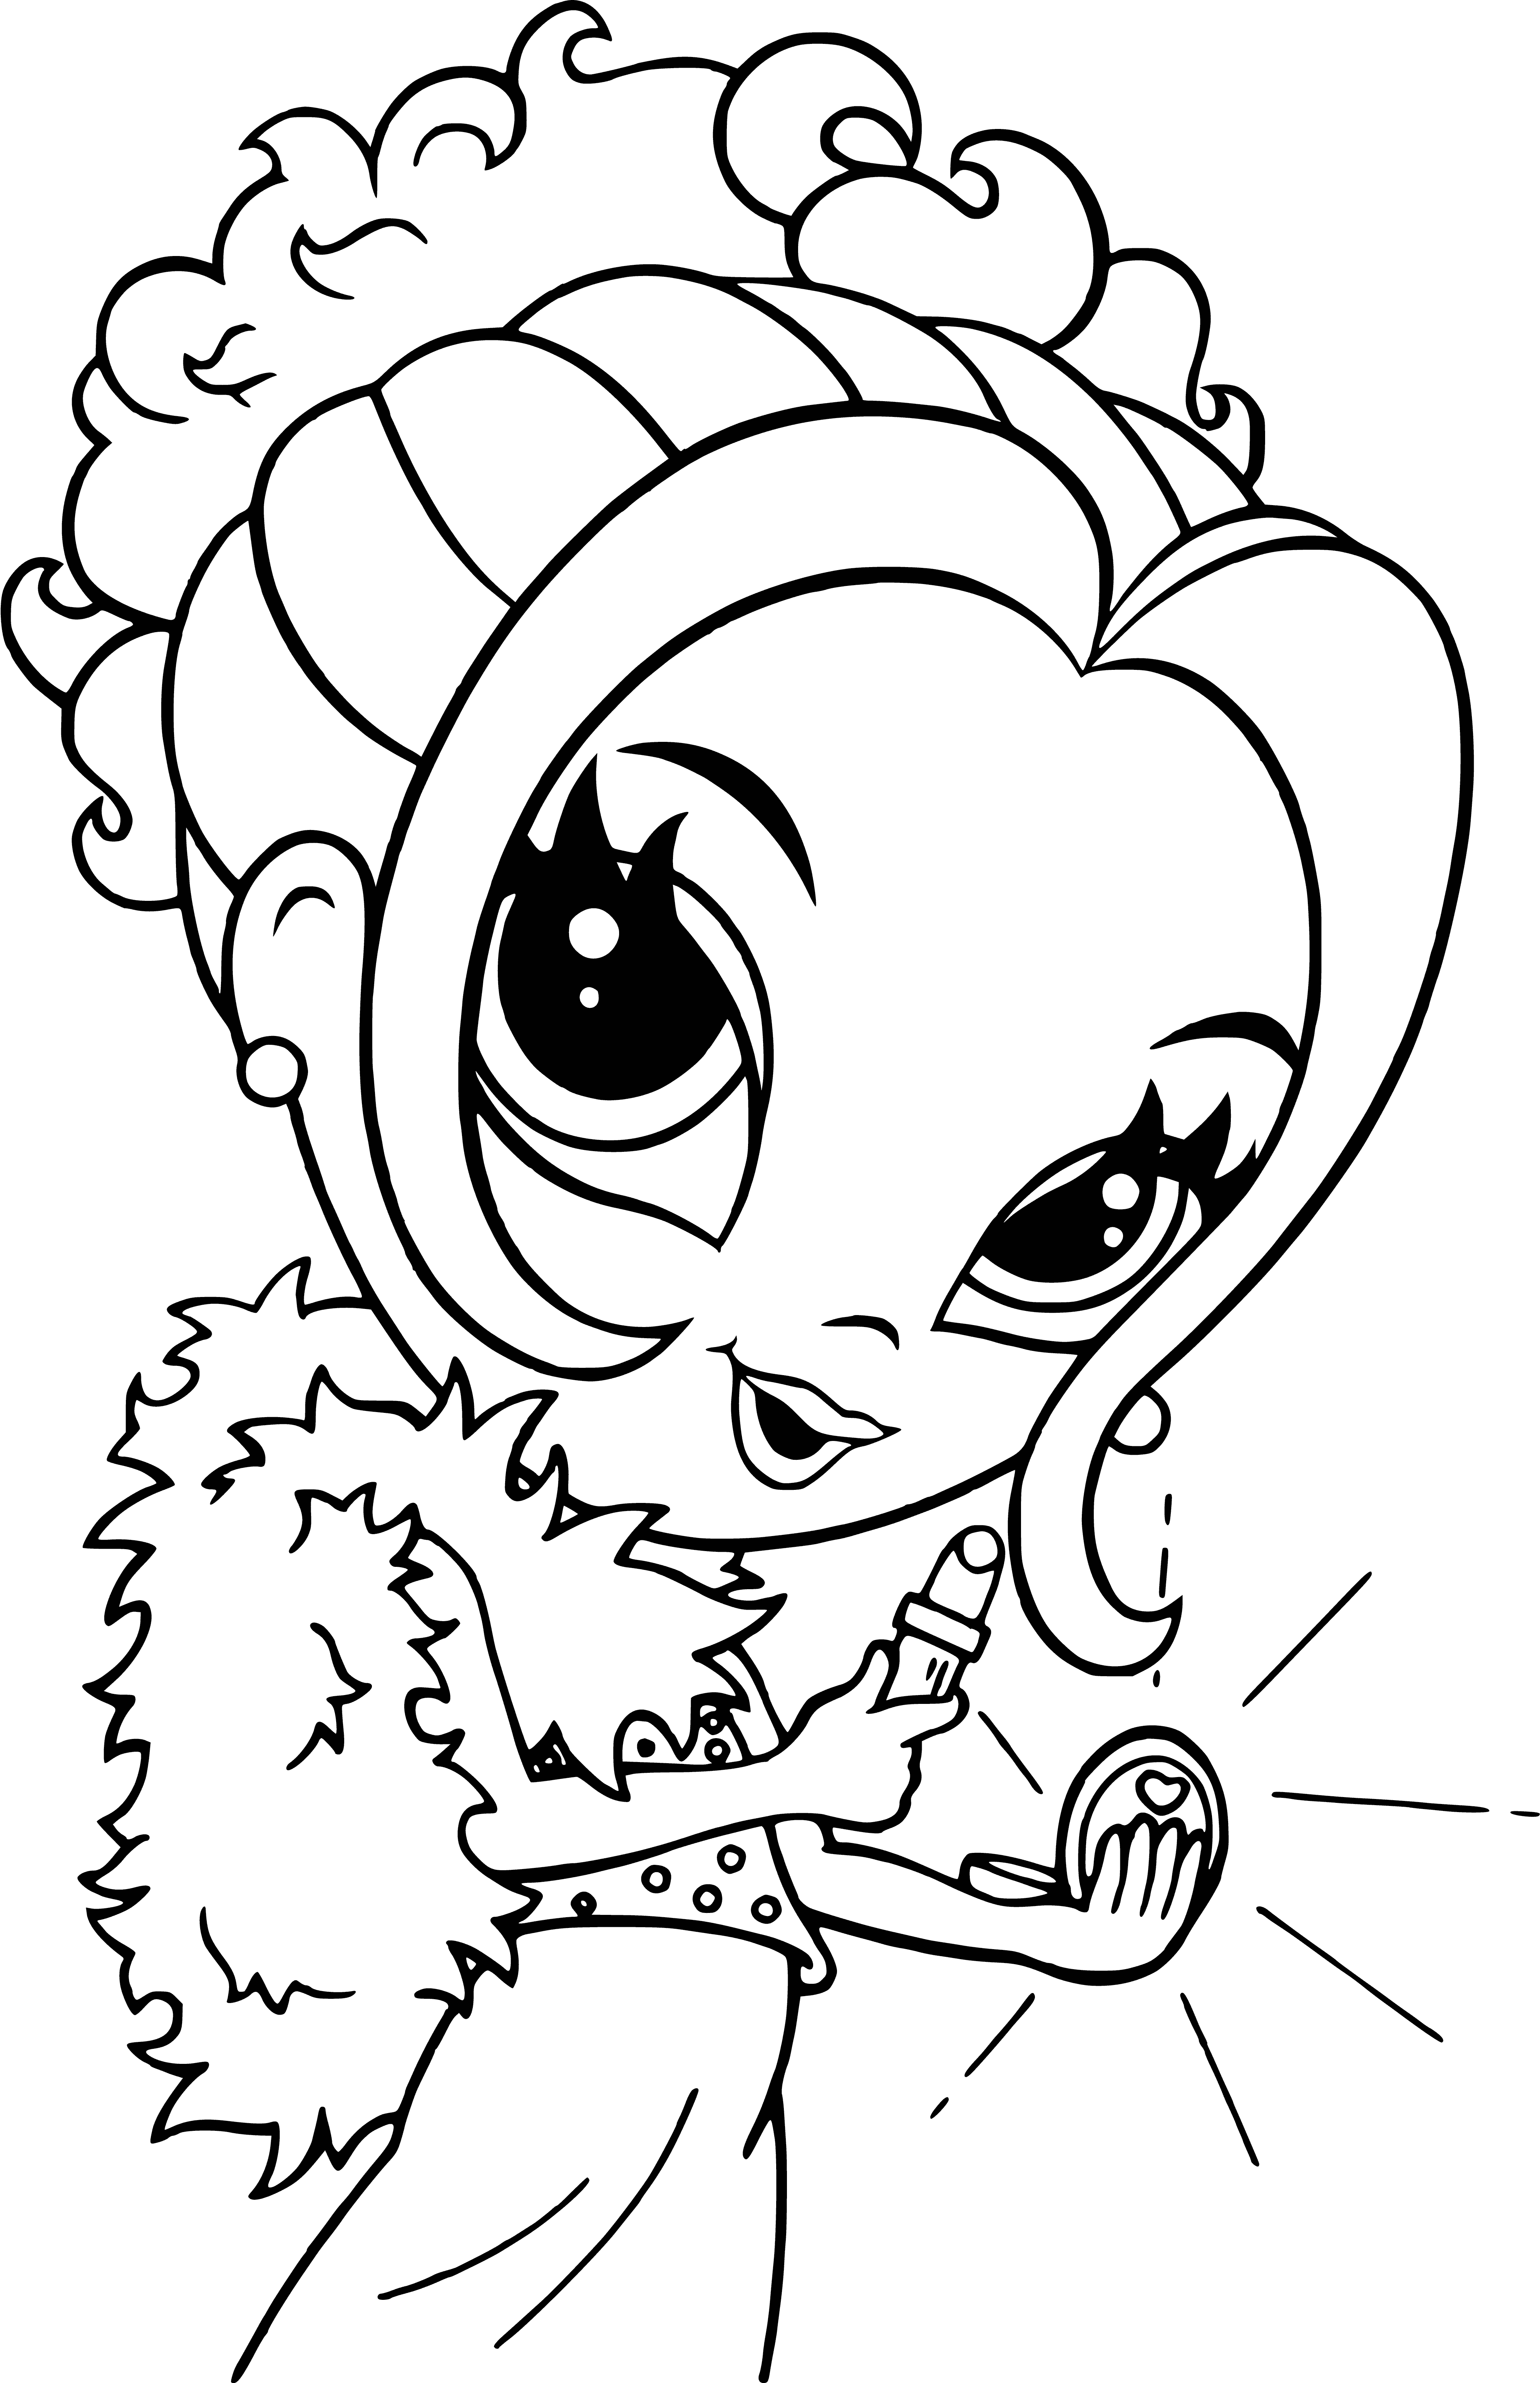 coloring page: Girl with long blonde hair in pink dress w/sparkles, holding purse & standing in front of pink car. #LisaFrank #GlamourGirl #ColoringPage